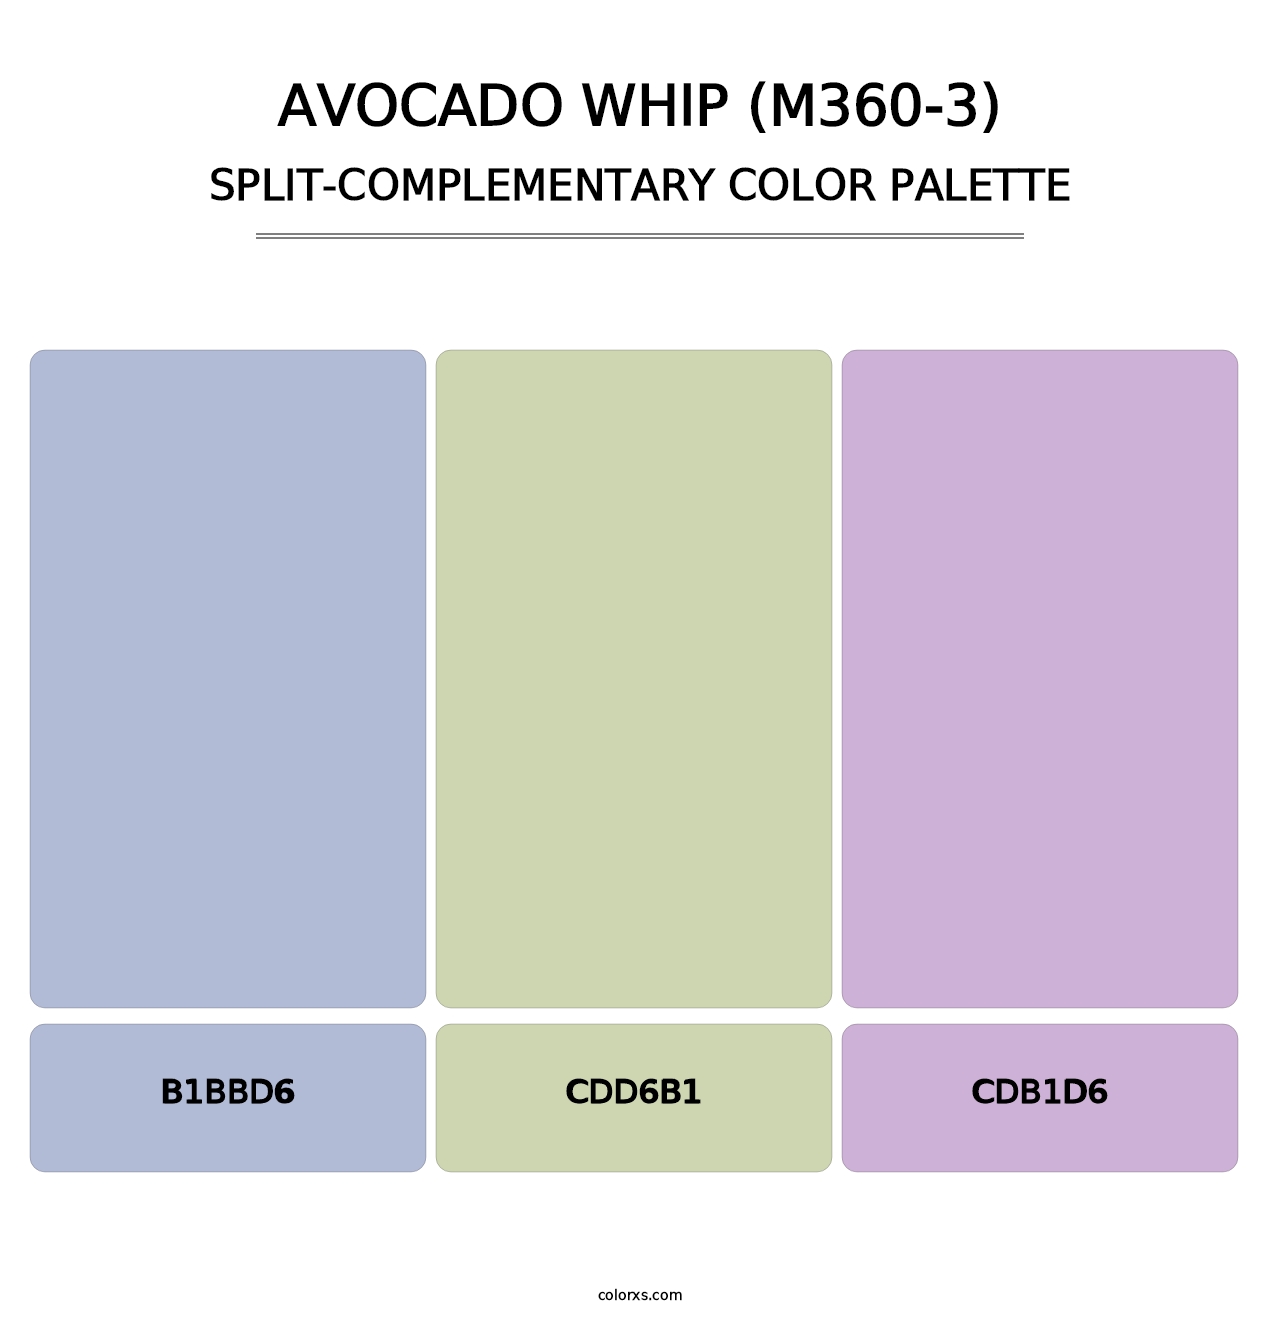 Avocado Whip (M360-3) - Split-Complementary Color Palette